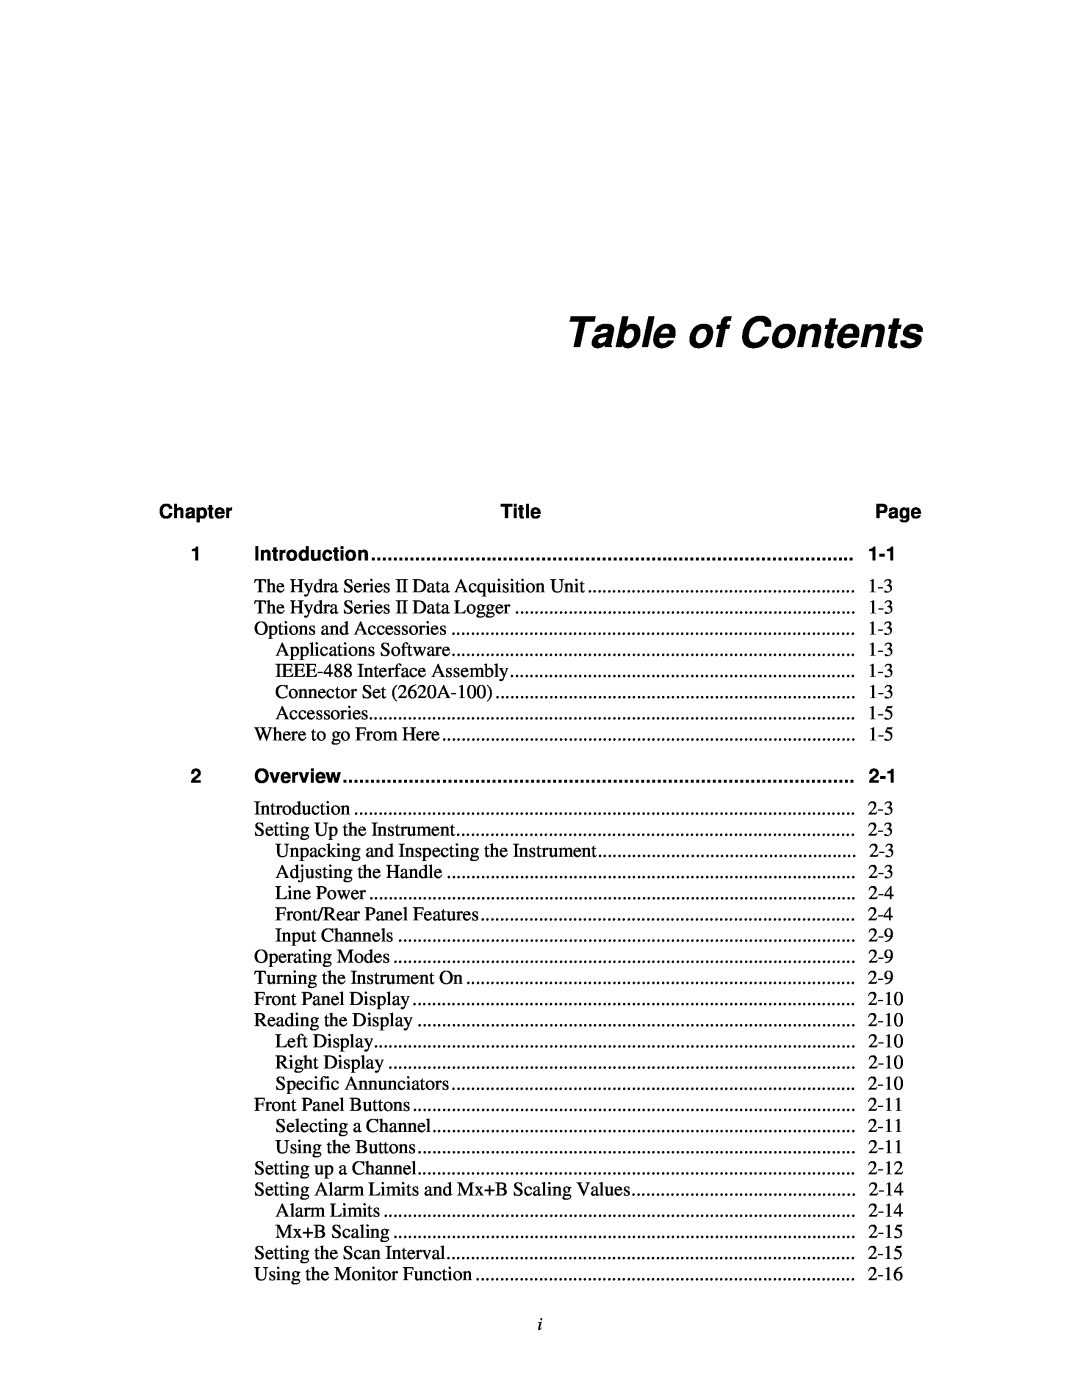 Fluke 2620A, 2625A user manual Table of Contents, Title, Introduction, Overview 